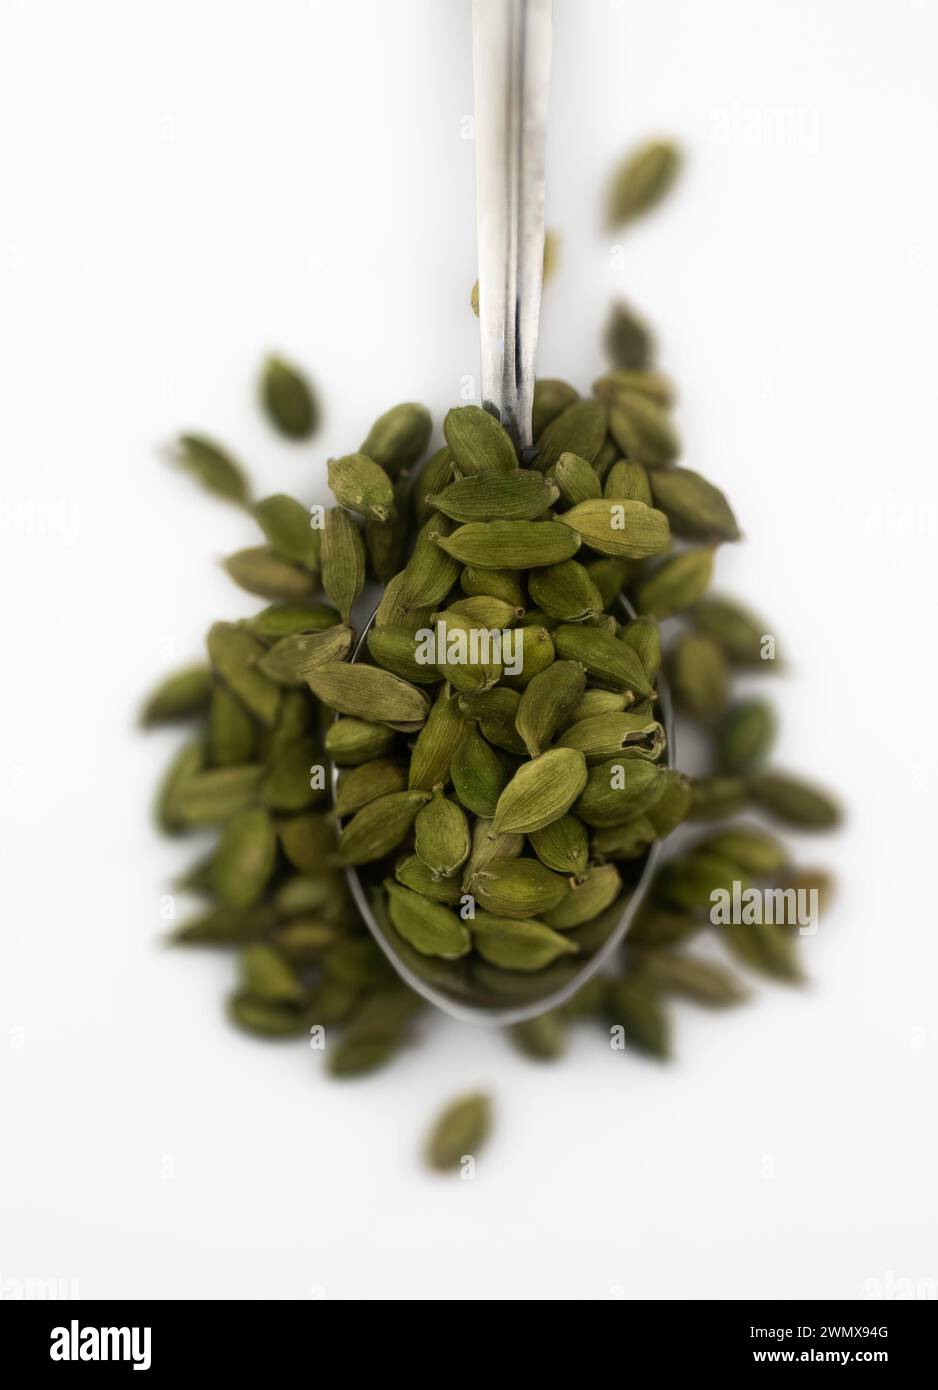 A top view of a small spoon with green cardamom pods pouring out on a white surface Stock Photo